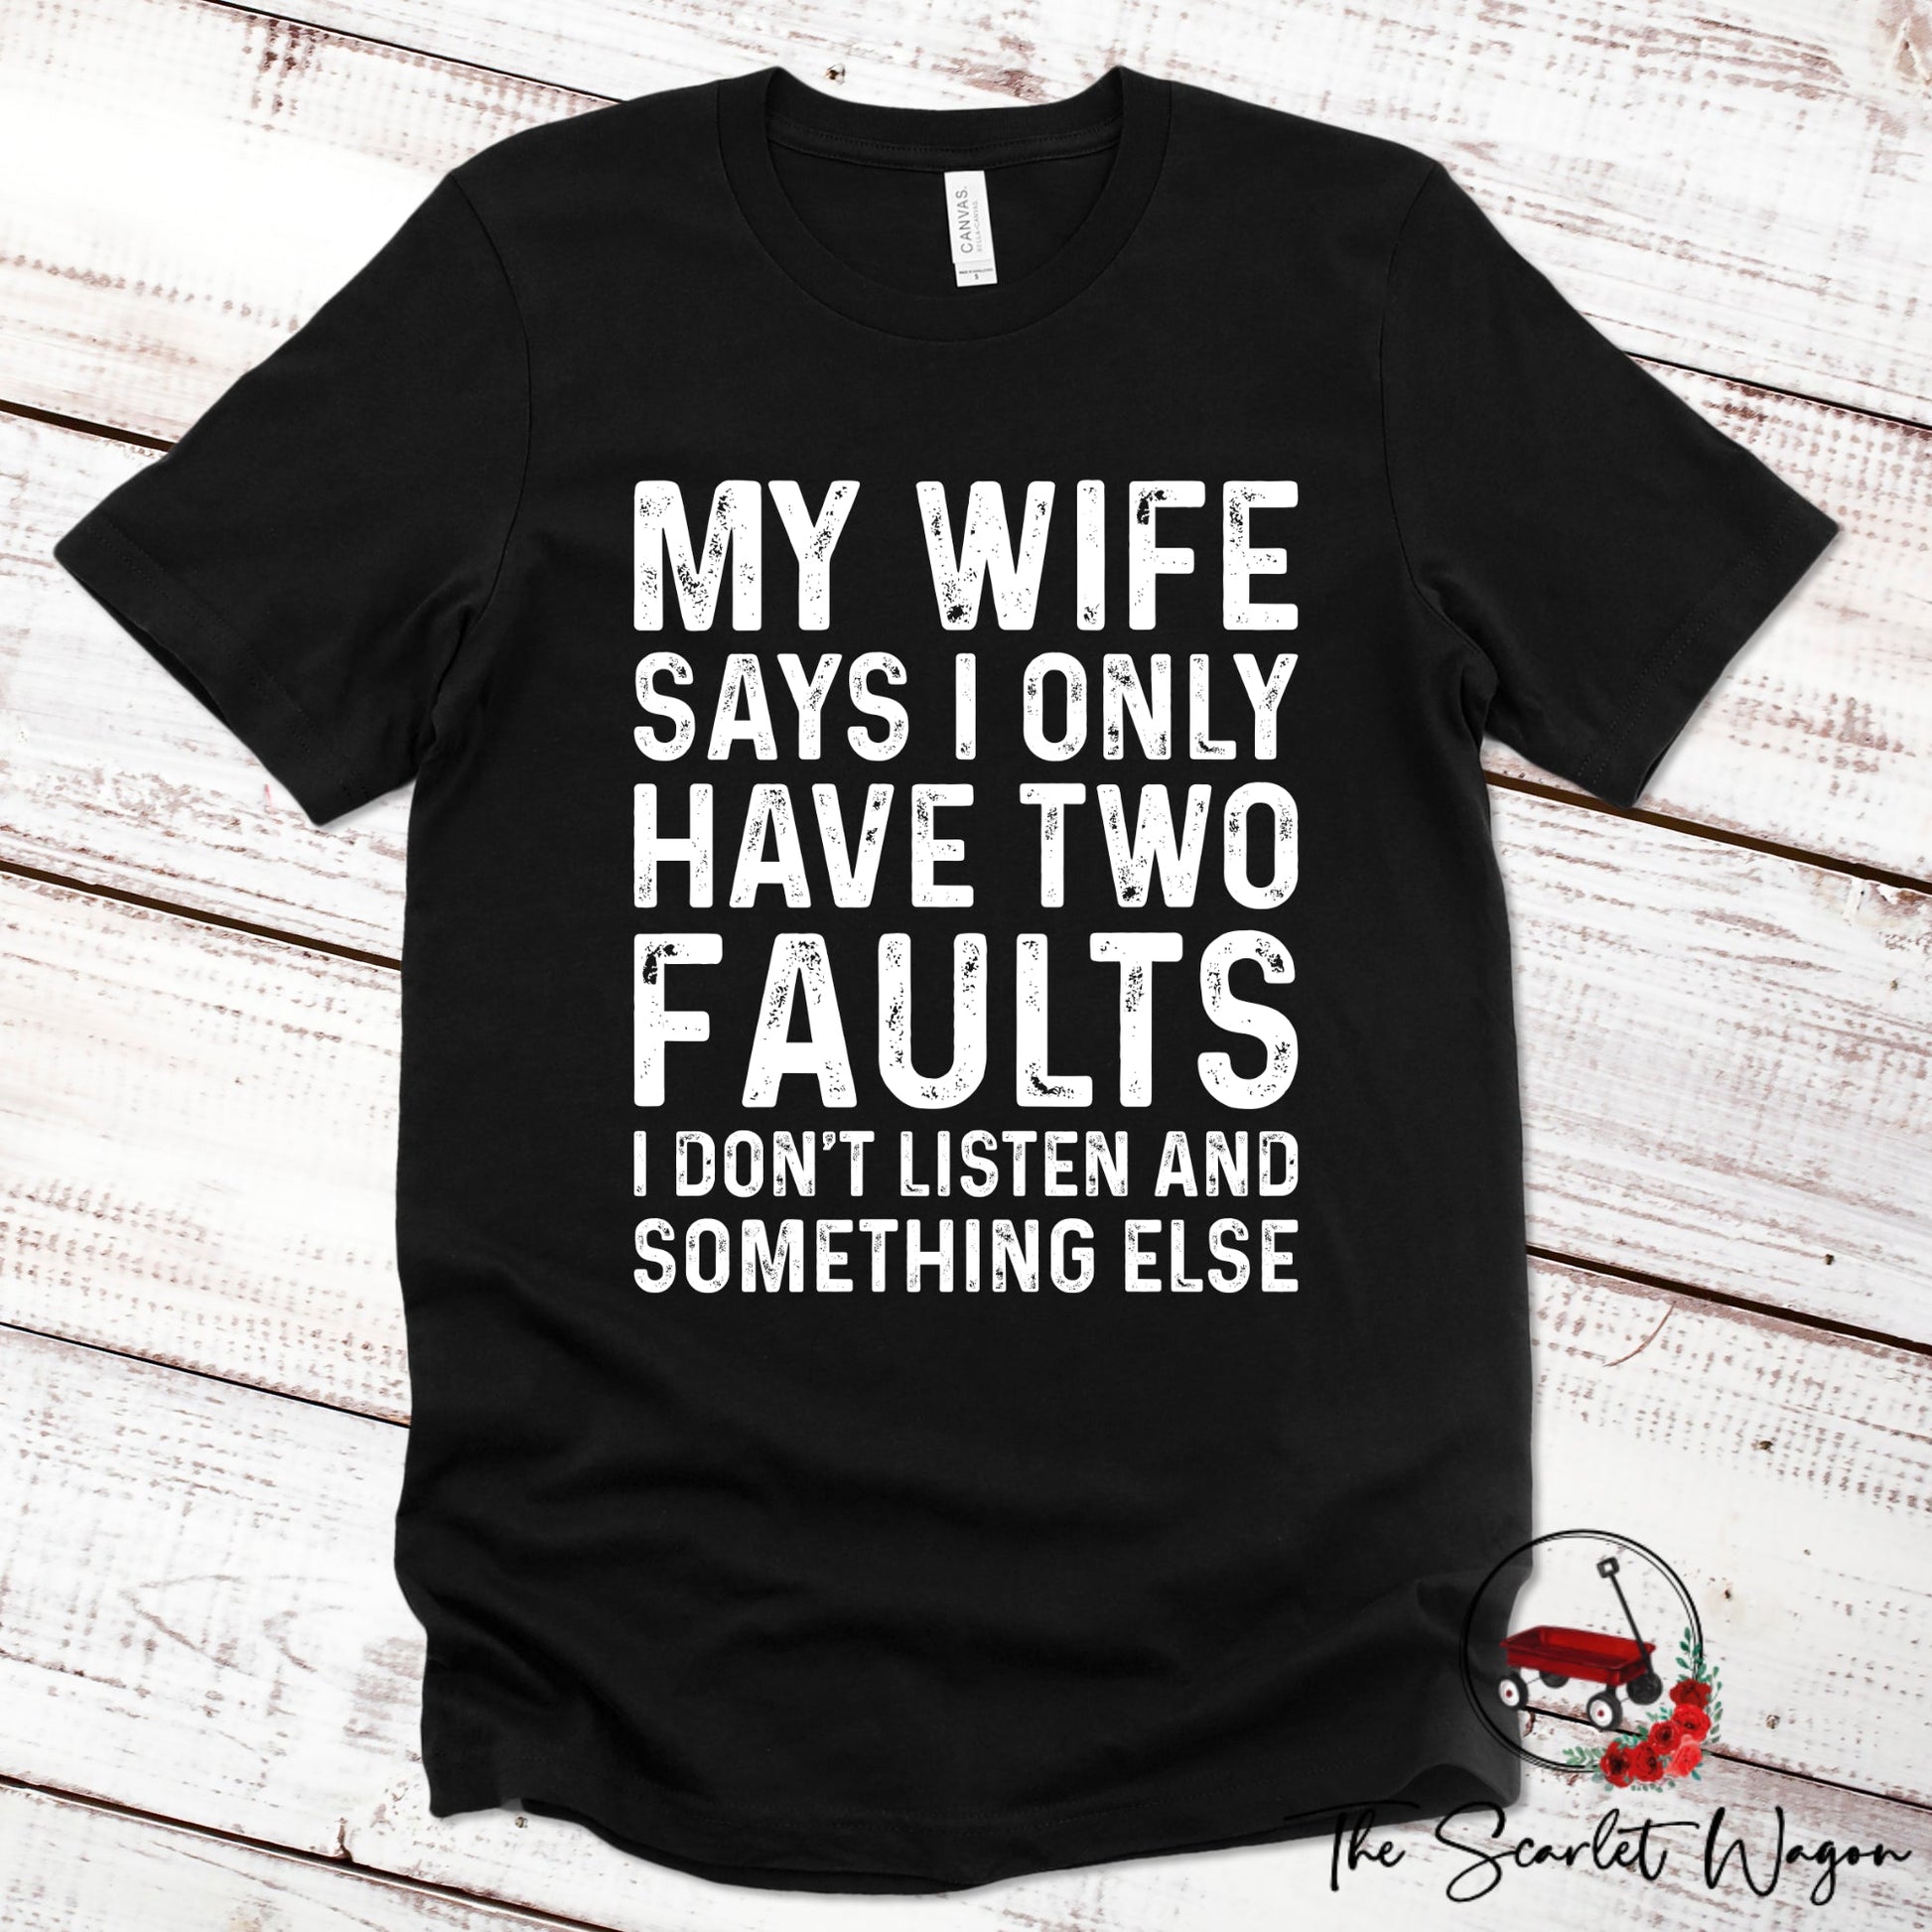 My Wife Says I Have Two Faults Premium Tee Scarlet Wagon Black XS 